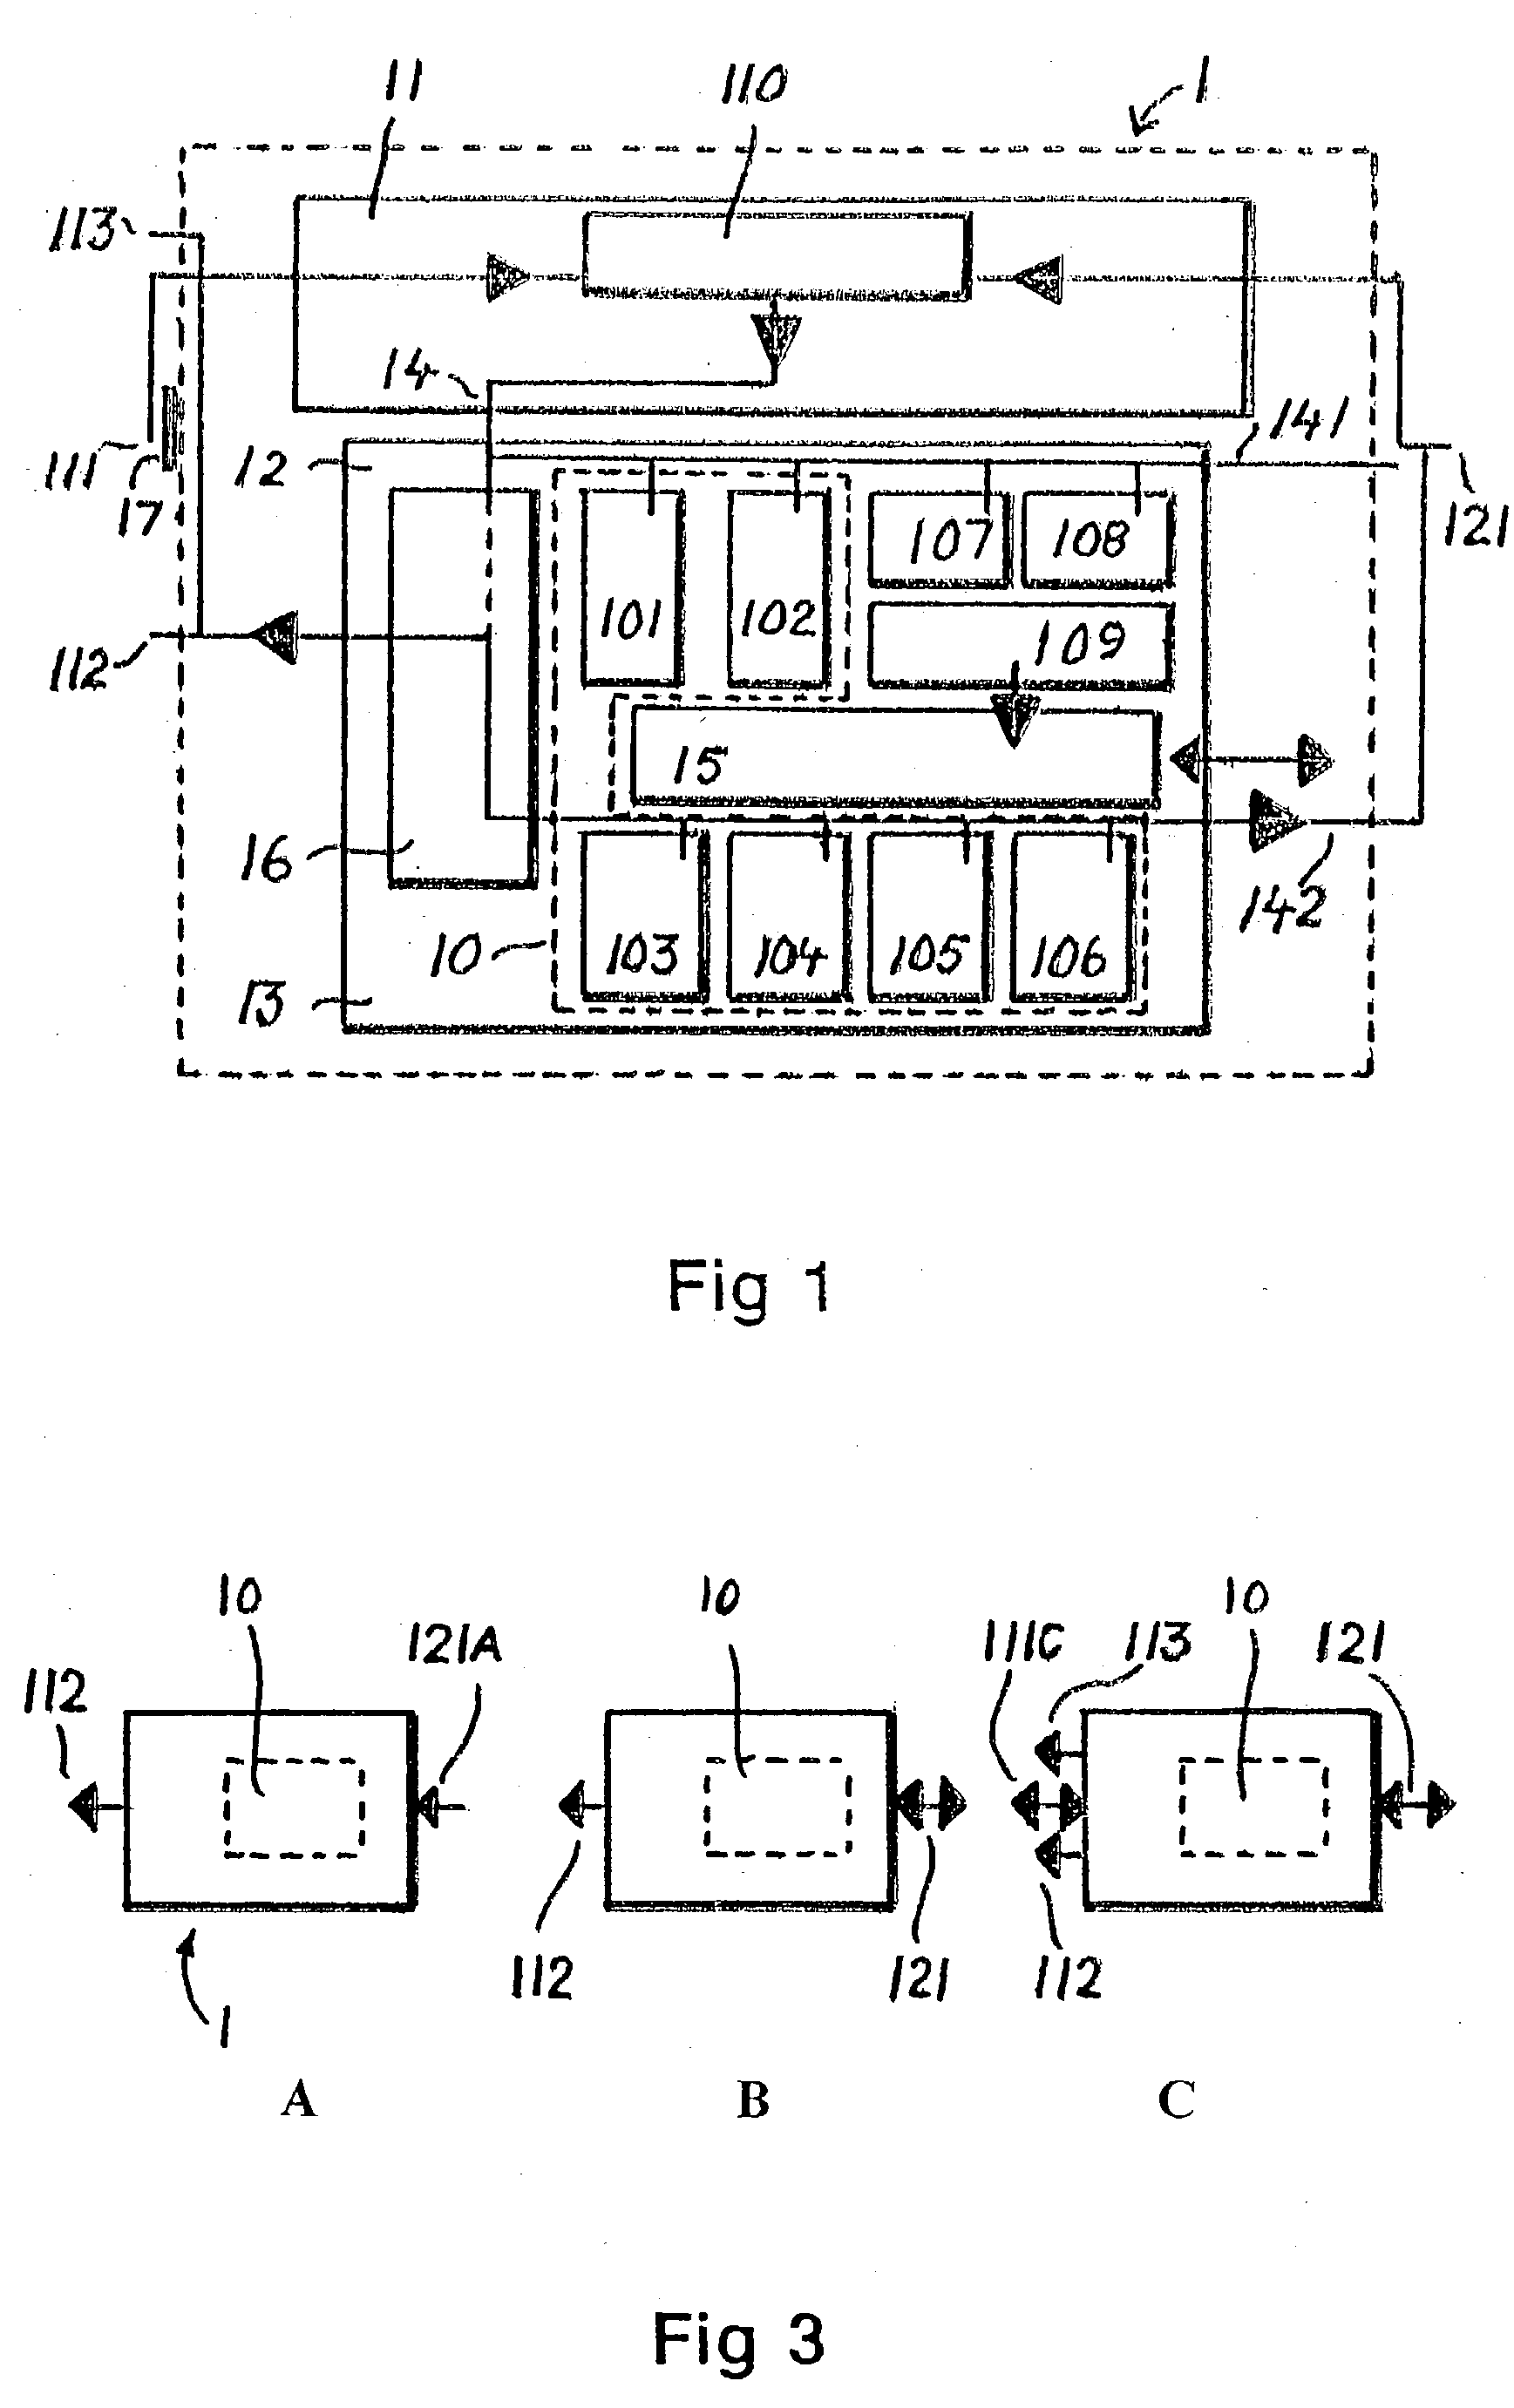 Arrangement of banknote handling machines for the infeed and outfeed of banknotes